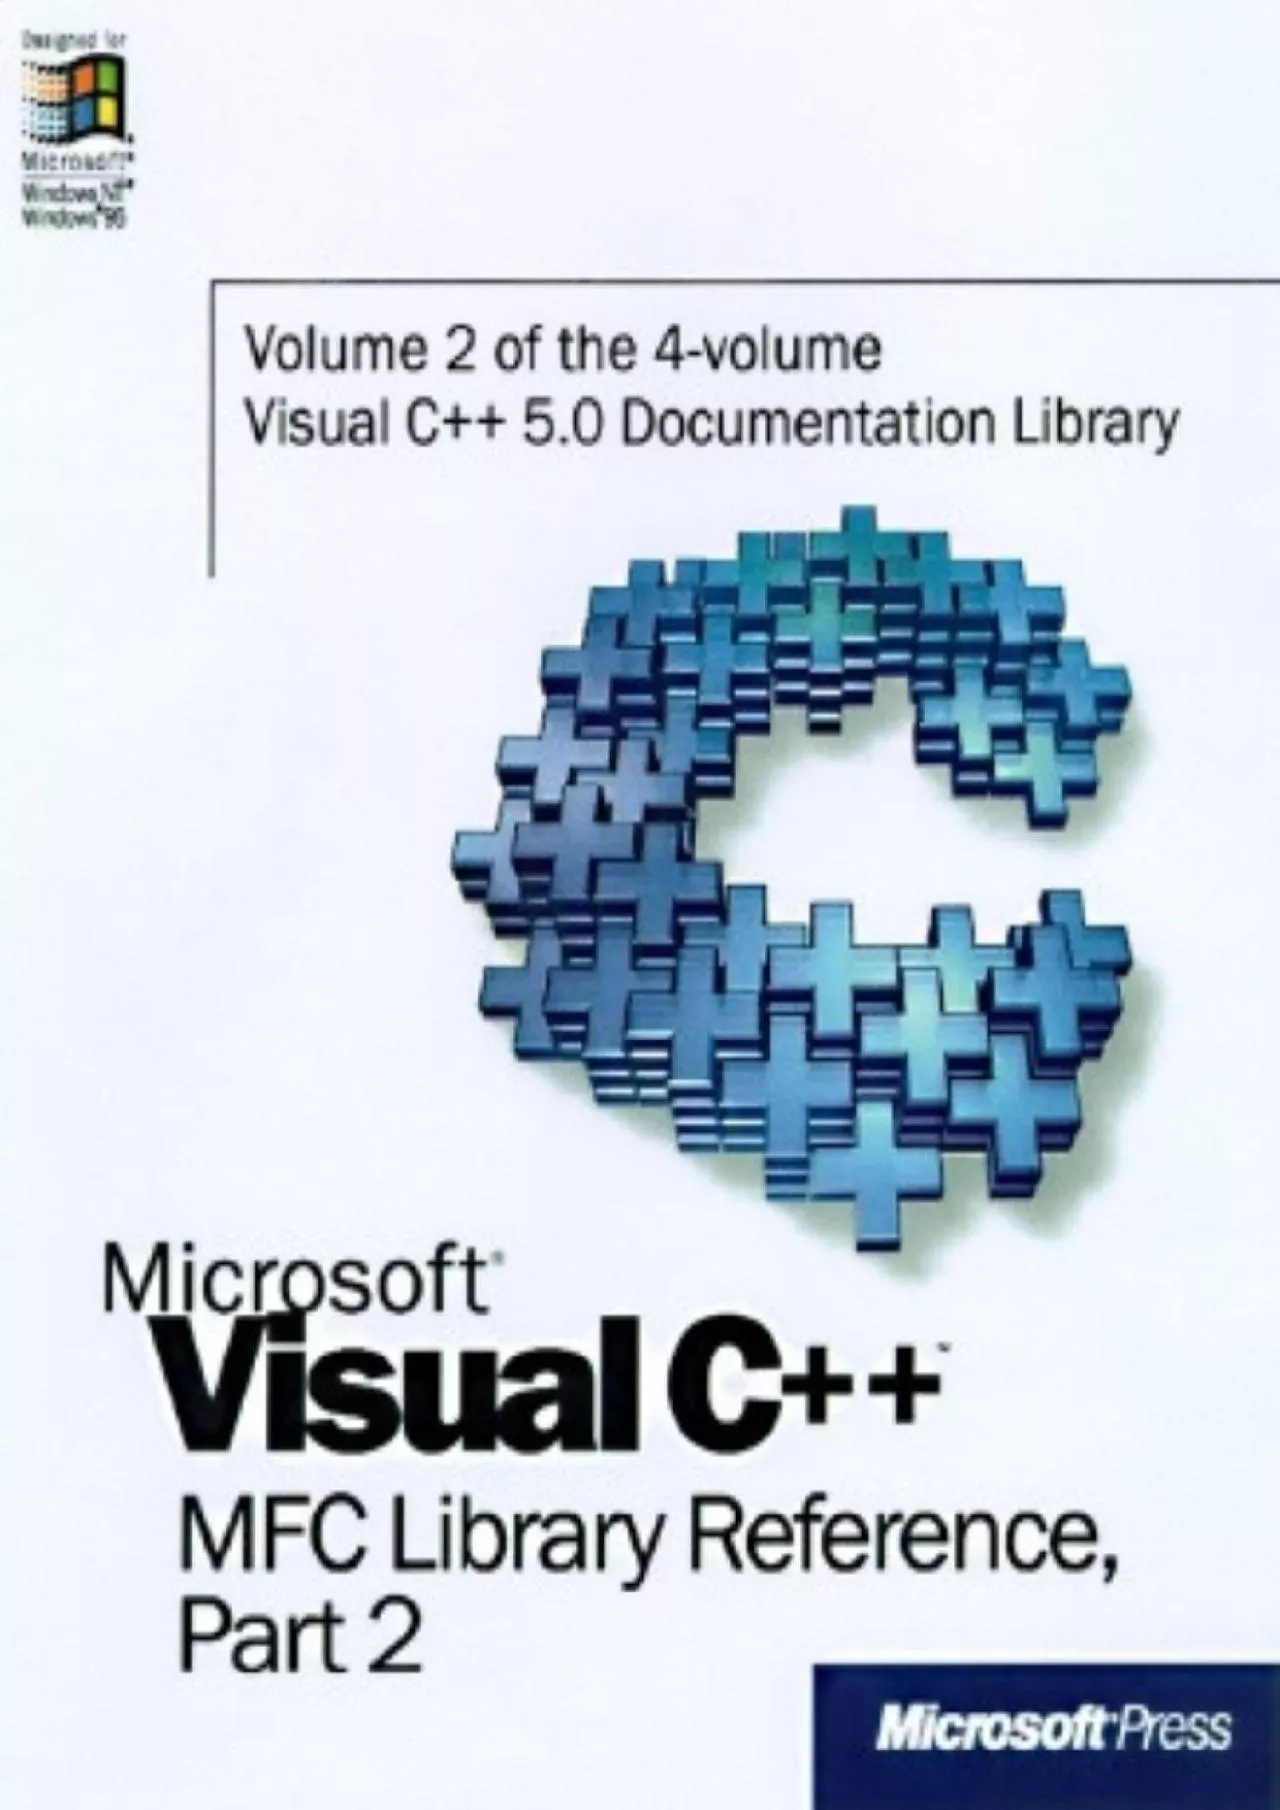 [FREE]-Microsoft Visual C++ MFC Library Reference, Part 2 (Visual C++ 5.0 Documentation